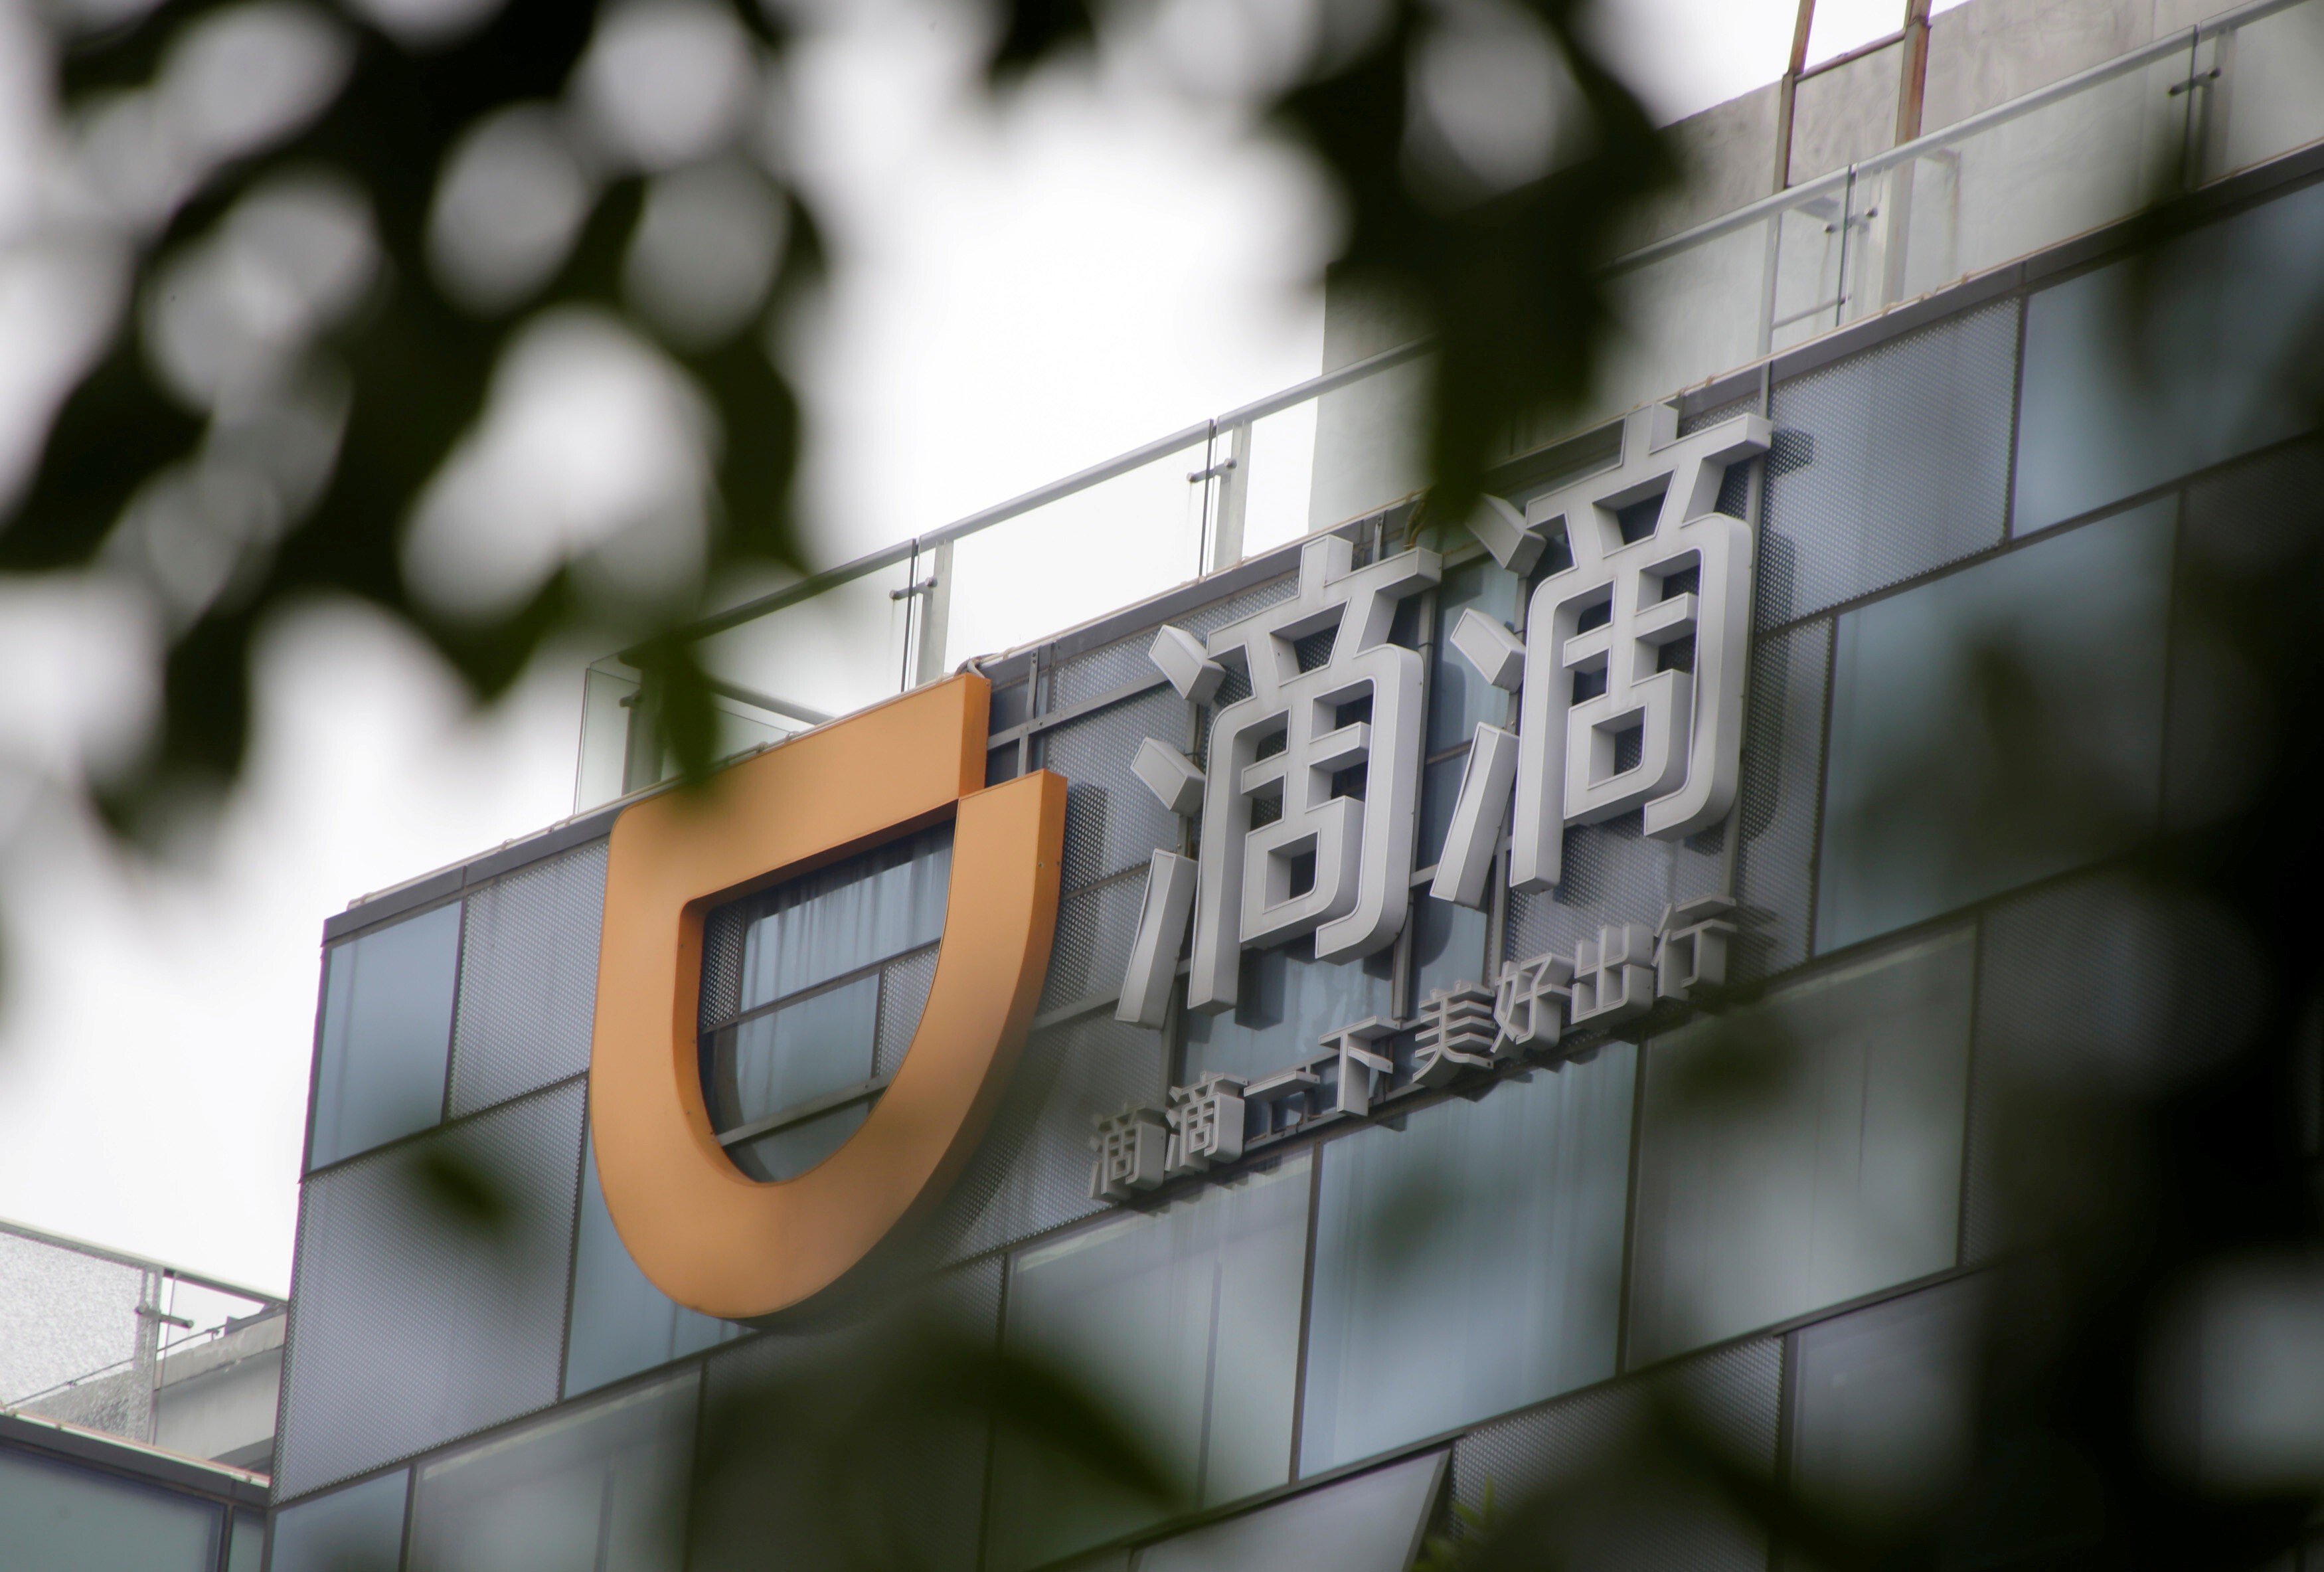 The Didi Chuxing logo is seen at its headquarters building in Beijing. Didi is continuing to diversify its business beyond ride-sharing amid some push-back against the sharing economy amid the Covid-19 pandemic. Photo: Reuters